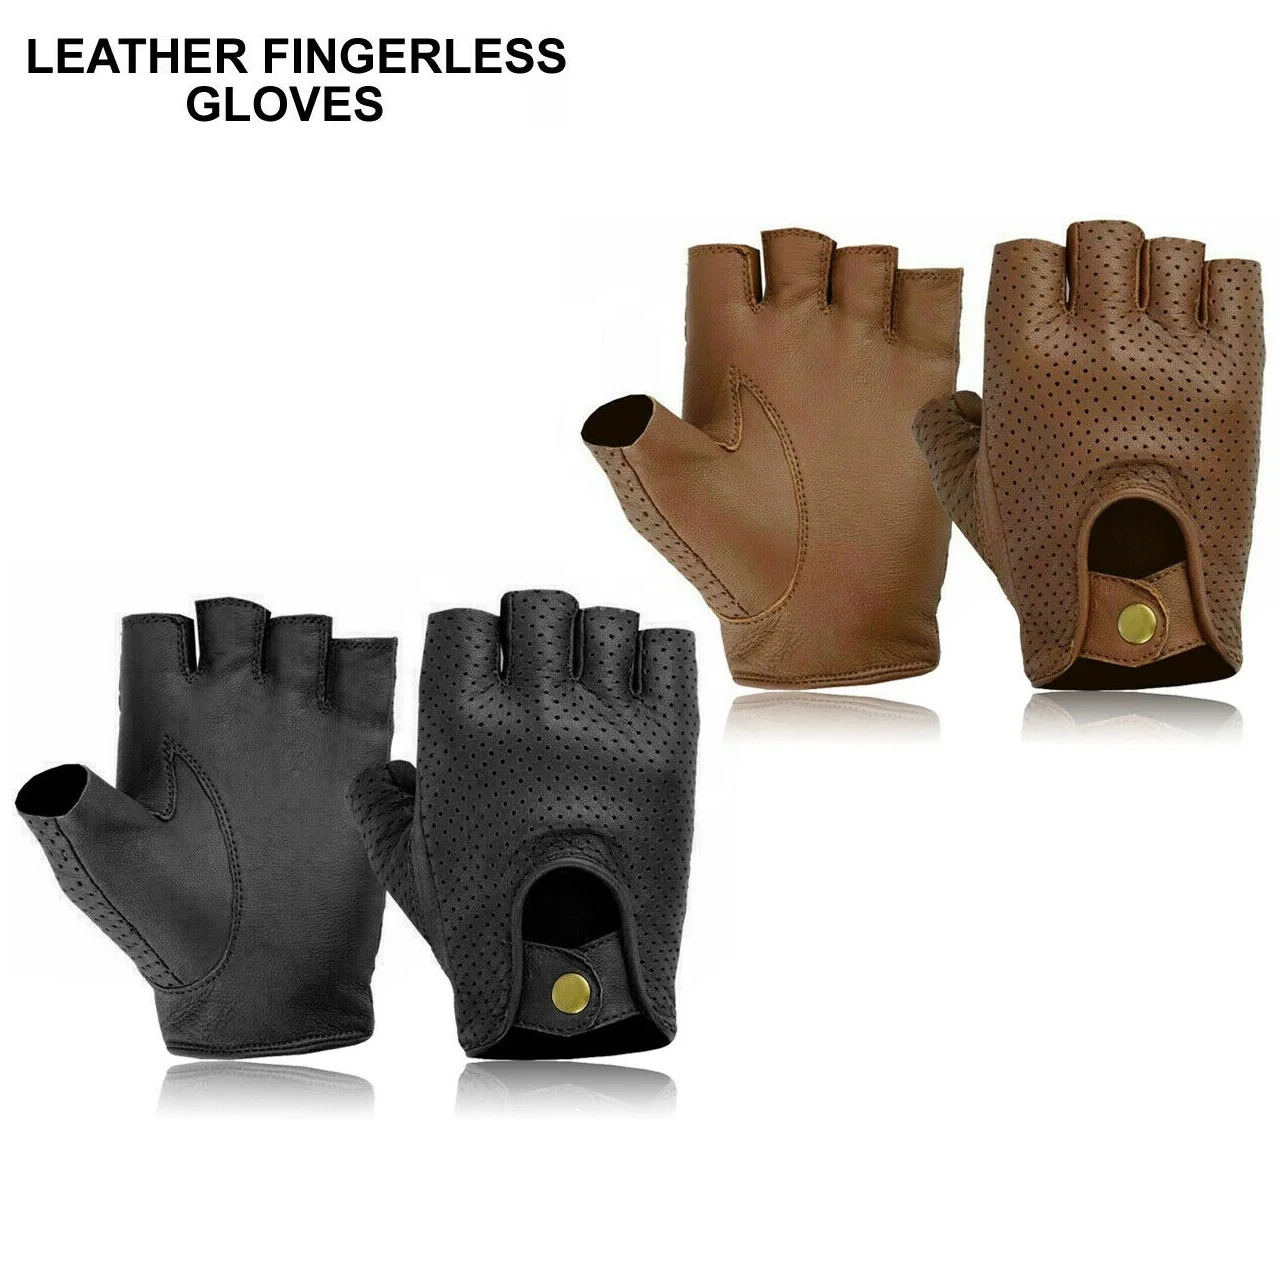 UNISEX LEATHER FINGERLESS GLOVES BIKER DRIVING CYCLING GYM TACTICAL & WHEELCHAIR 